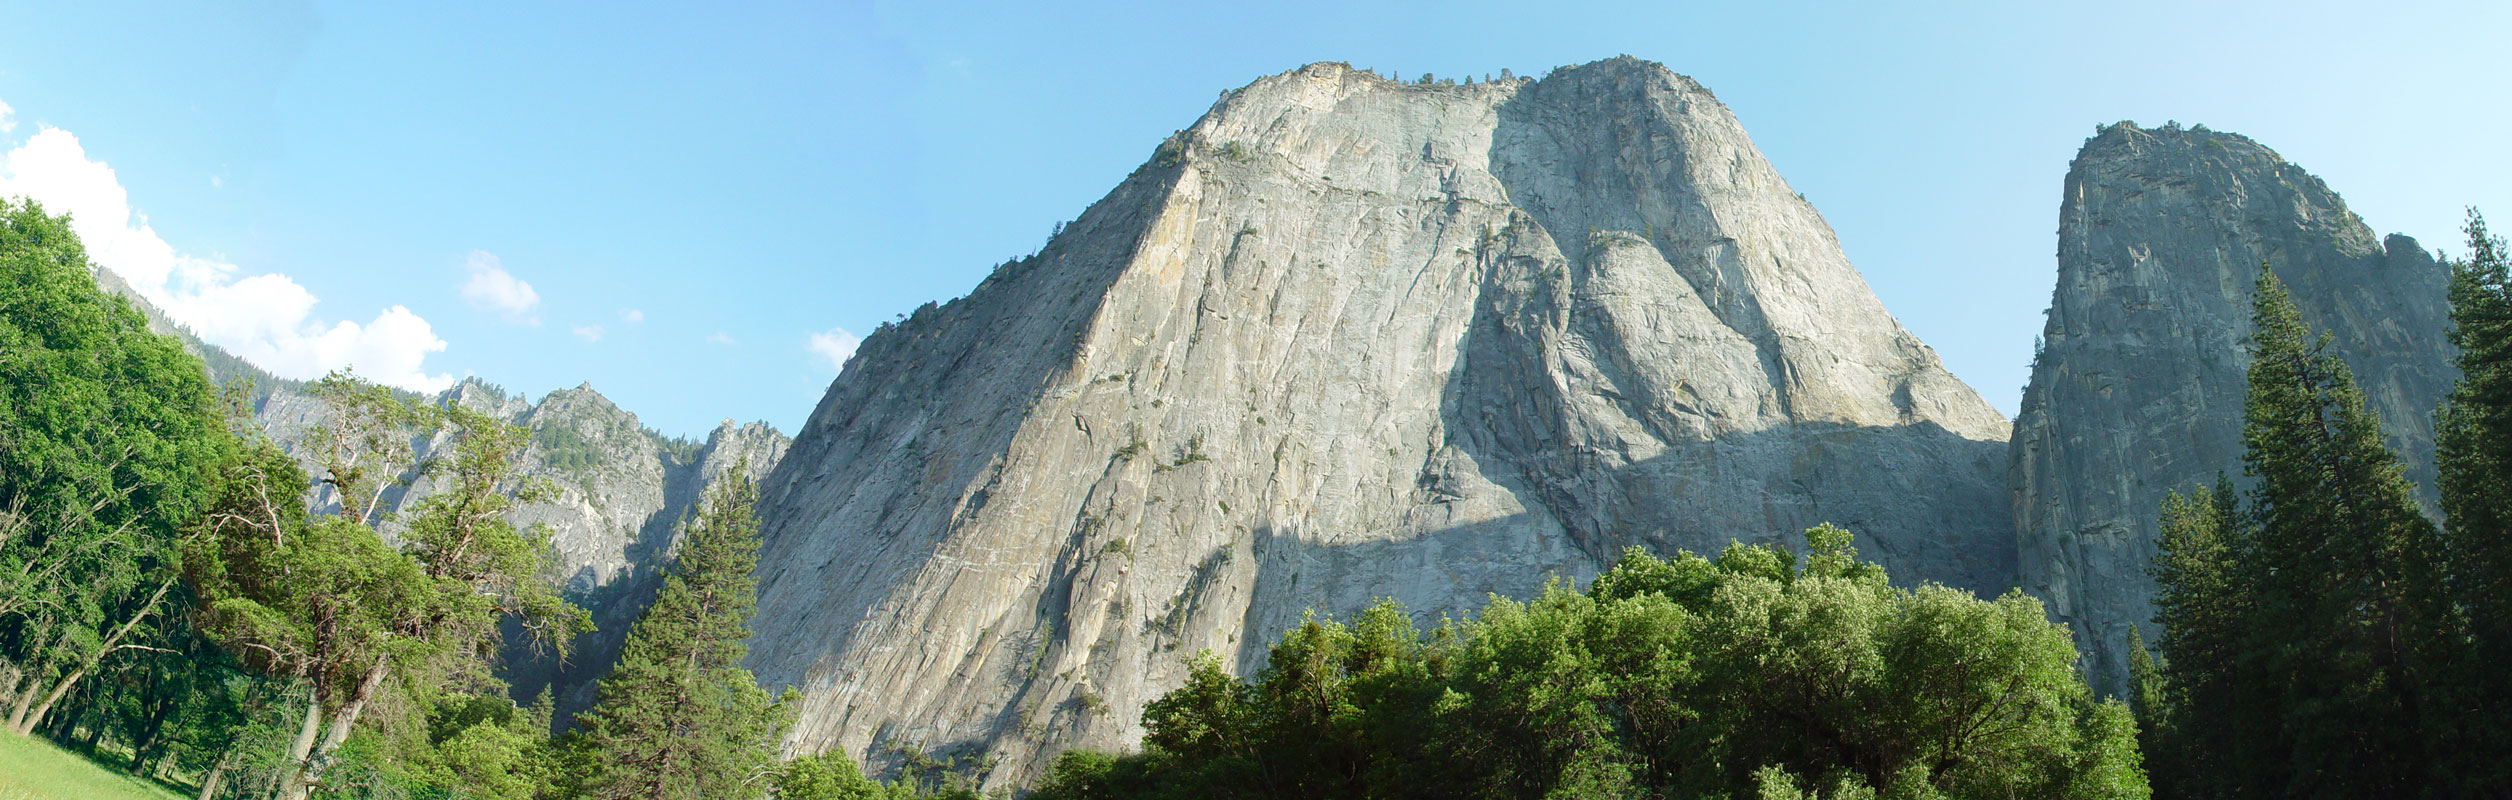 Cliffs in Yosemite, California from the valley floor